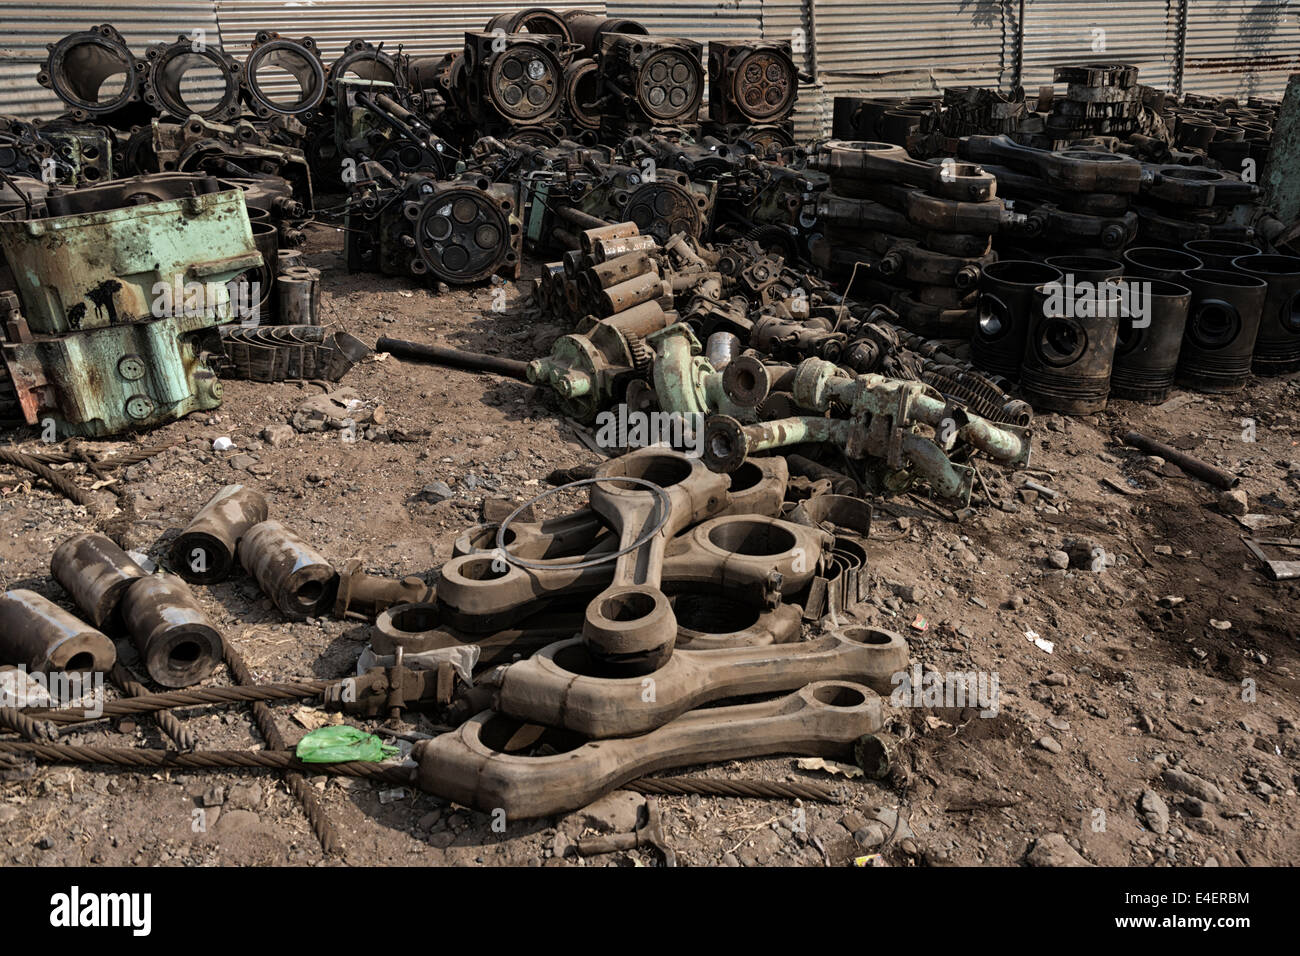 Scrapped ship engine parts in Alang ship breaking yard, India. Stock Photo